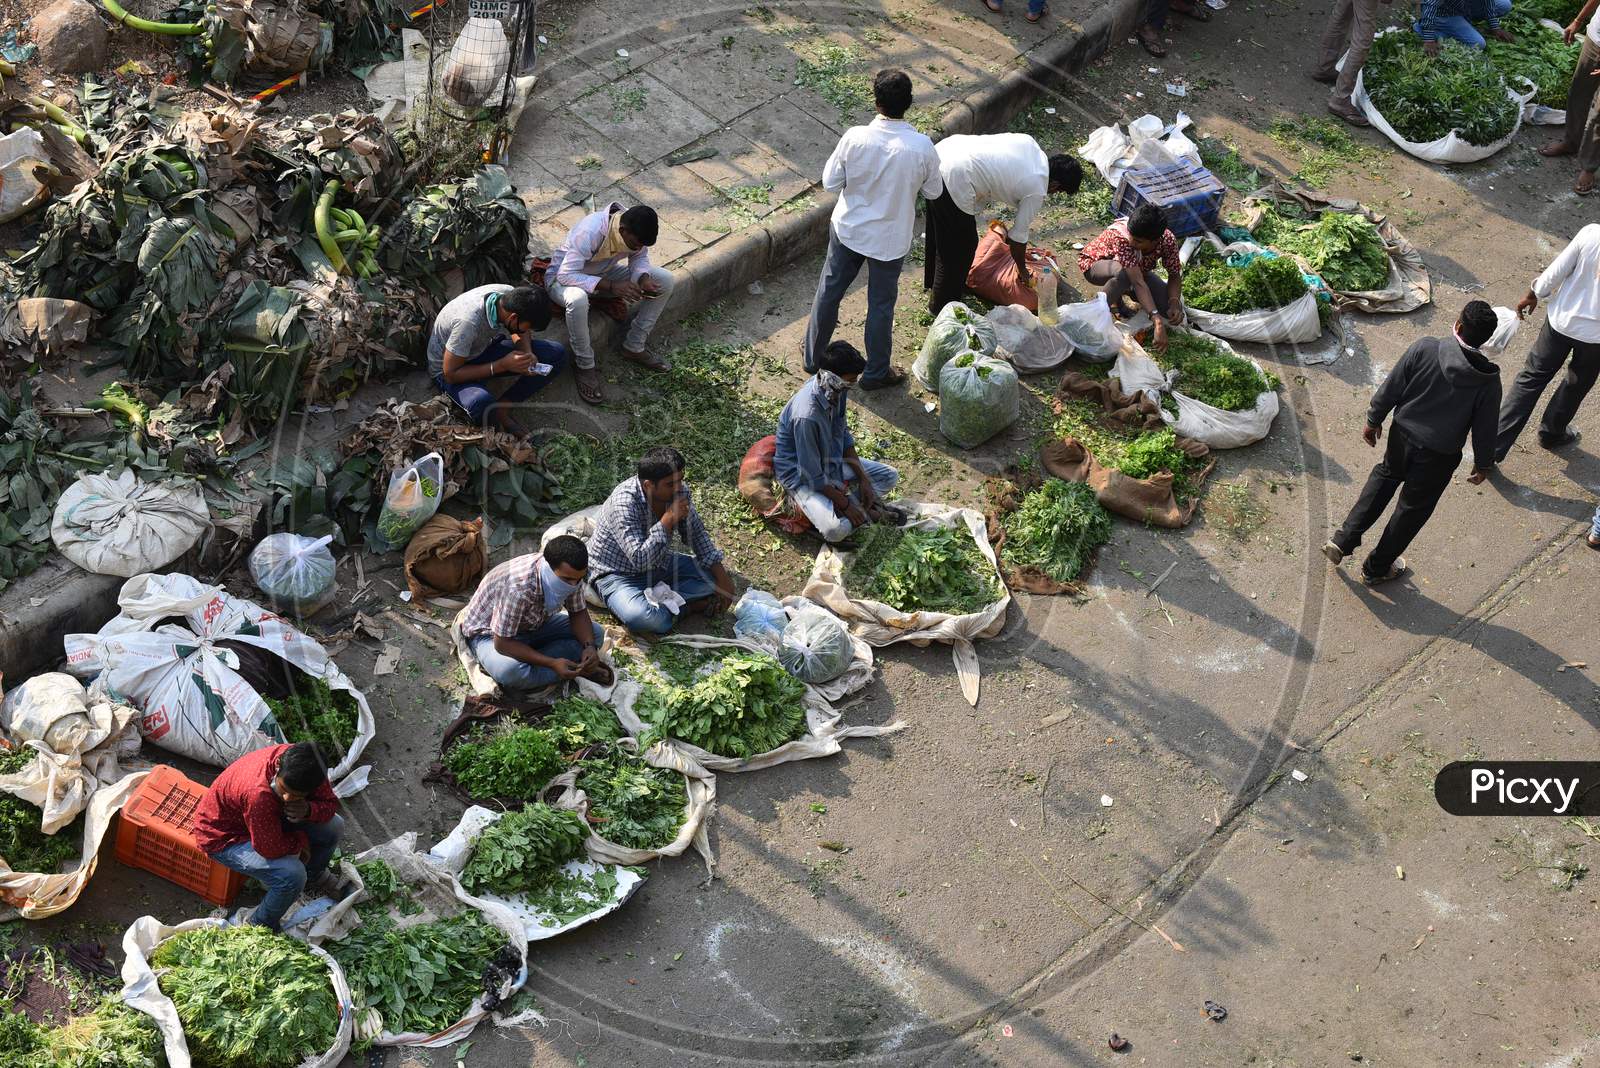 People fail to maintain social distance as they buy groceries, vegetables and fruits in a makeshif market under Kphb-Madhapur Flyover